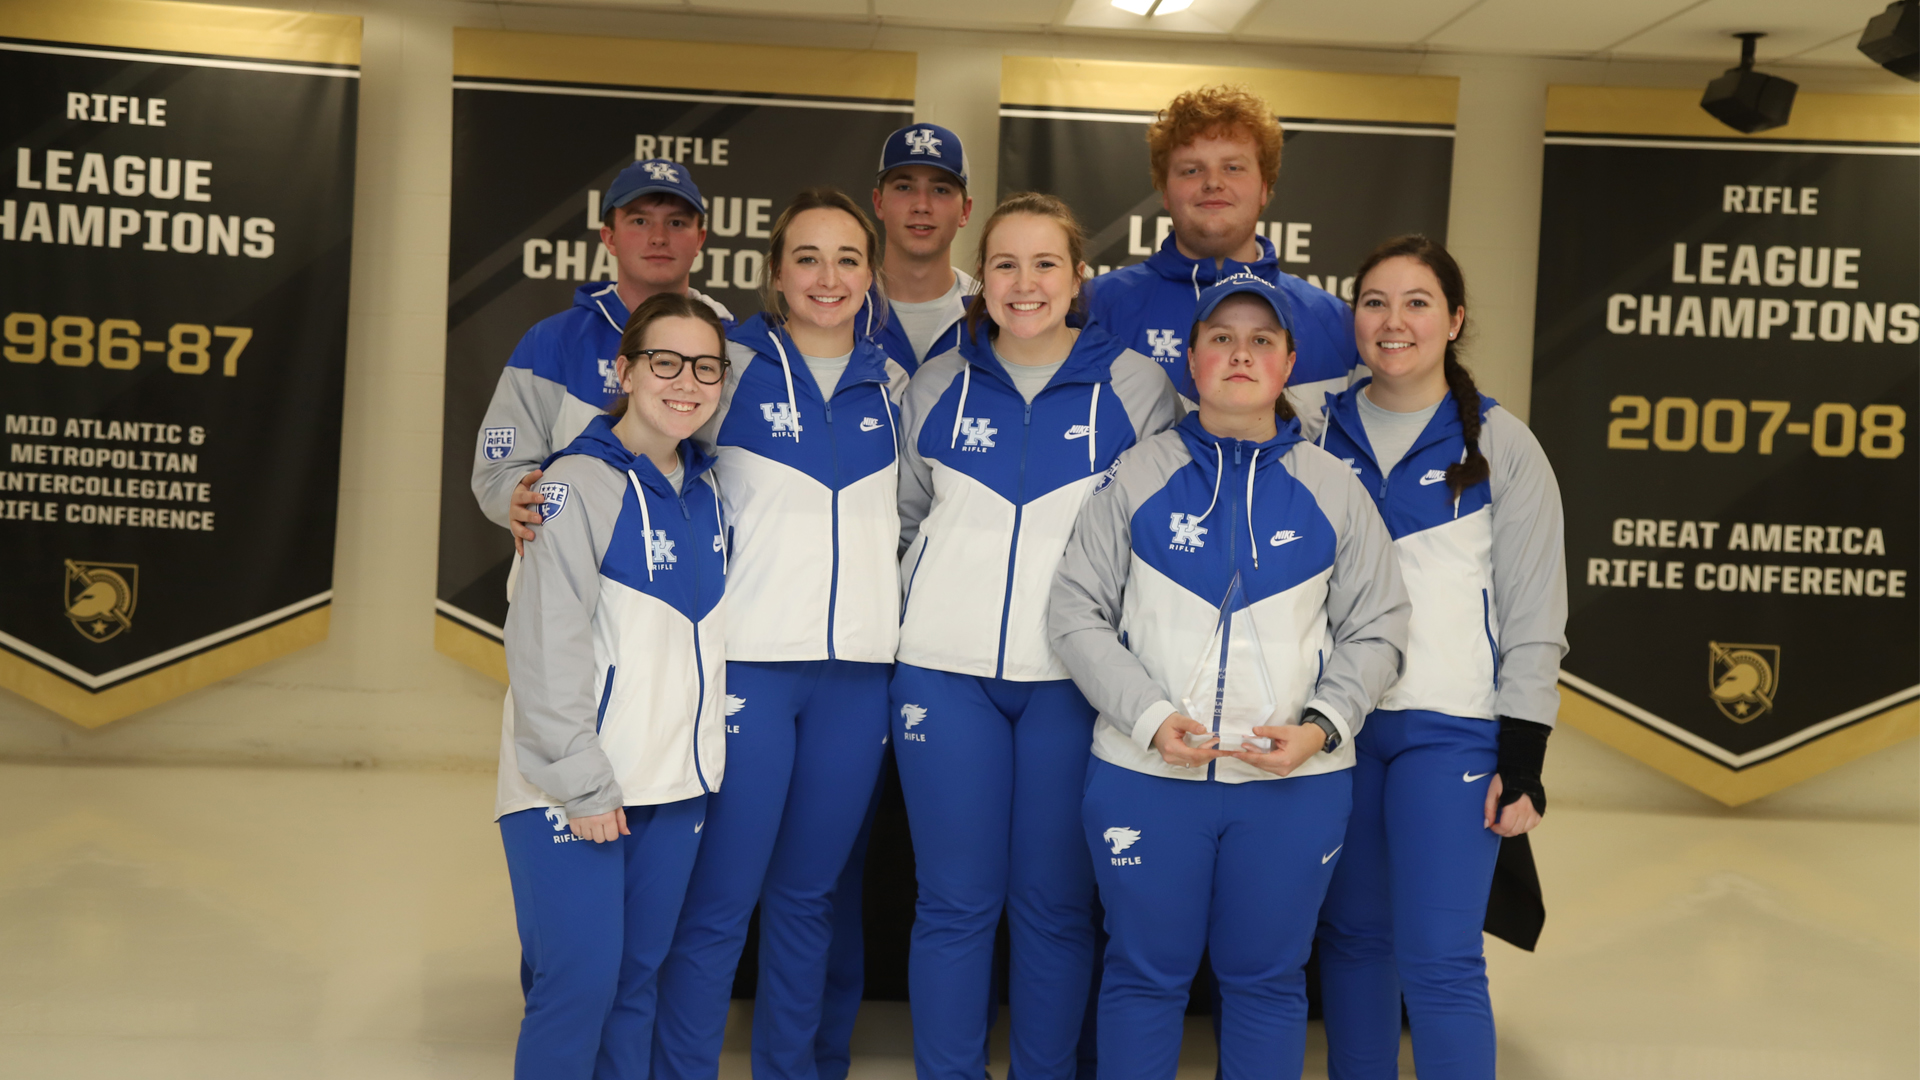 Peiser Wins Air Rifle Gold, Kentucky Finishes 2nd Overall